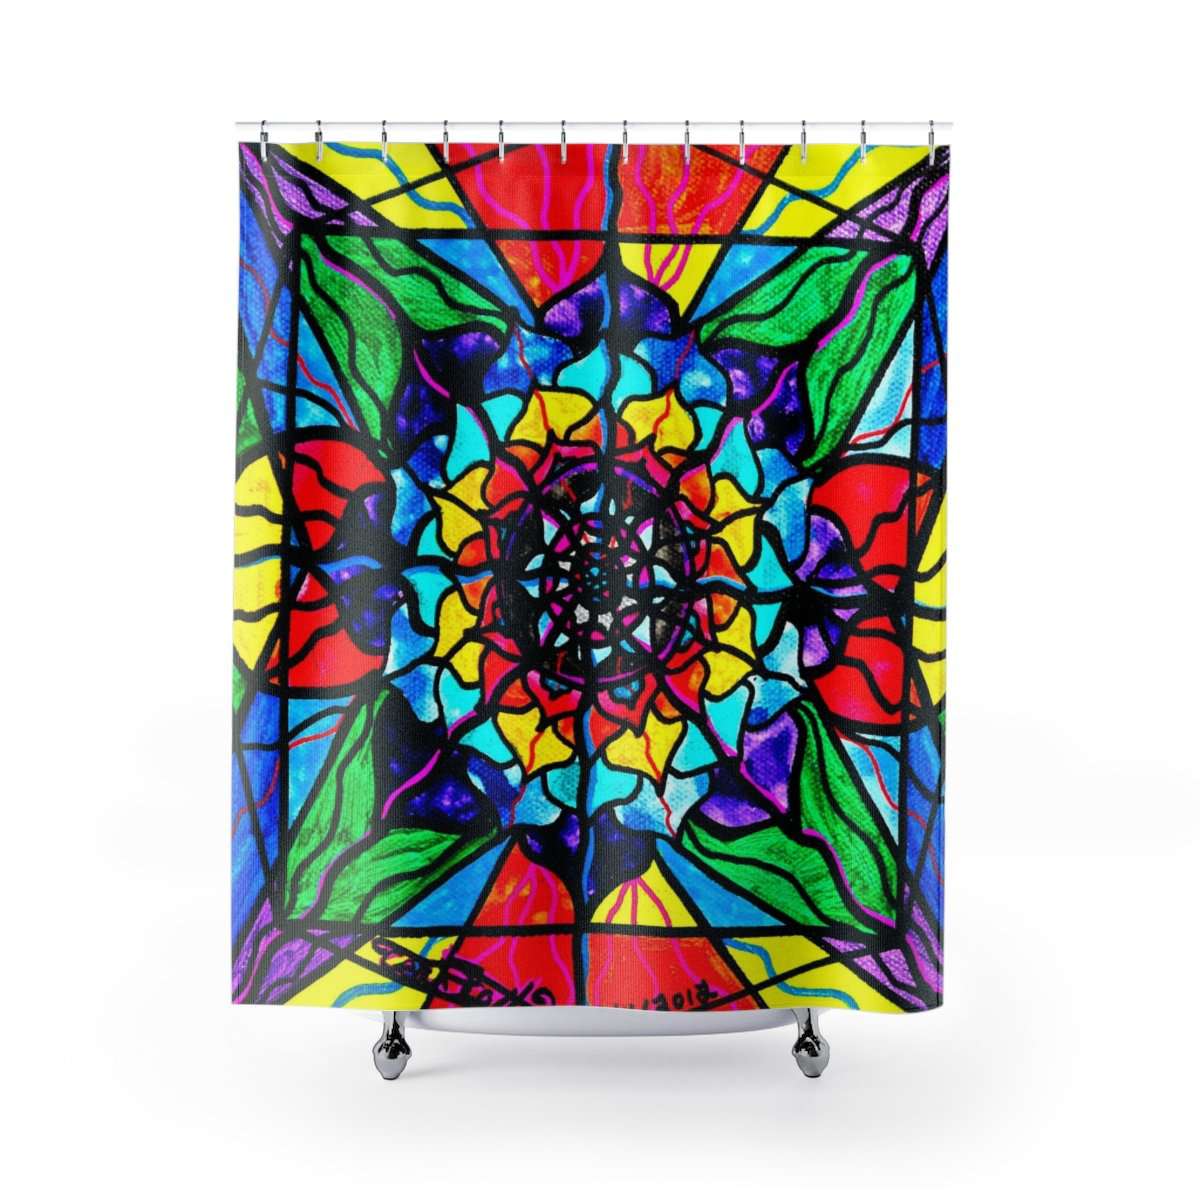 Personal Expansion - Shower Curtains